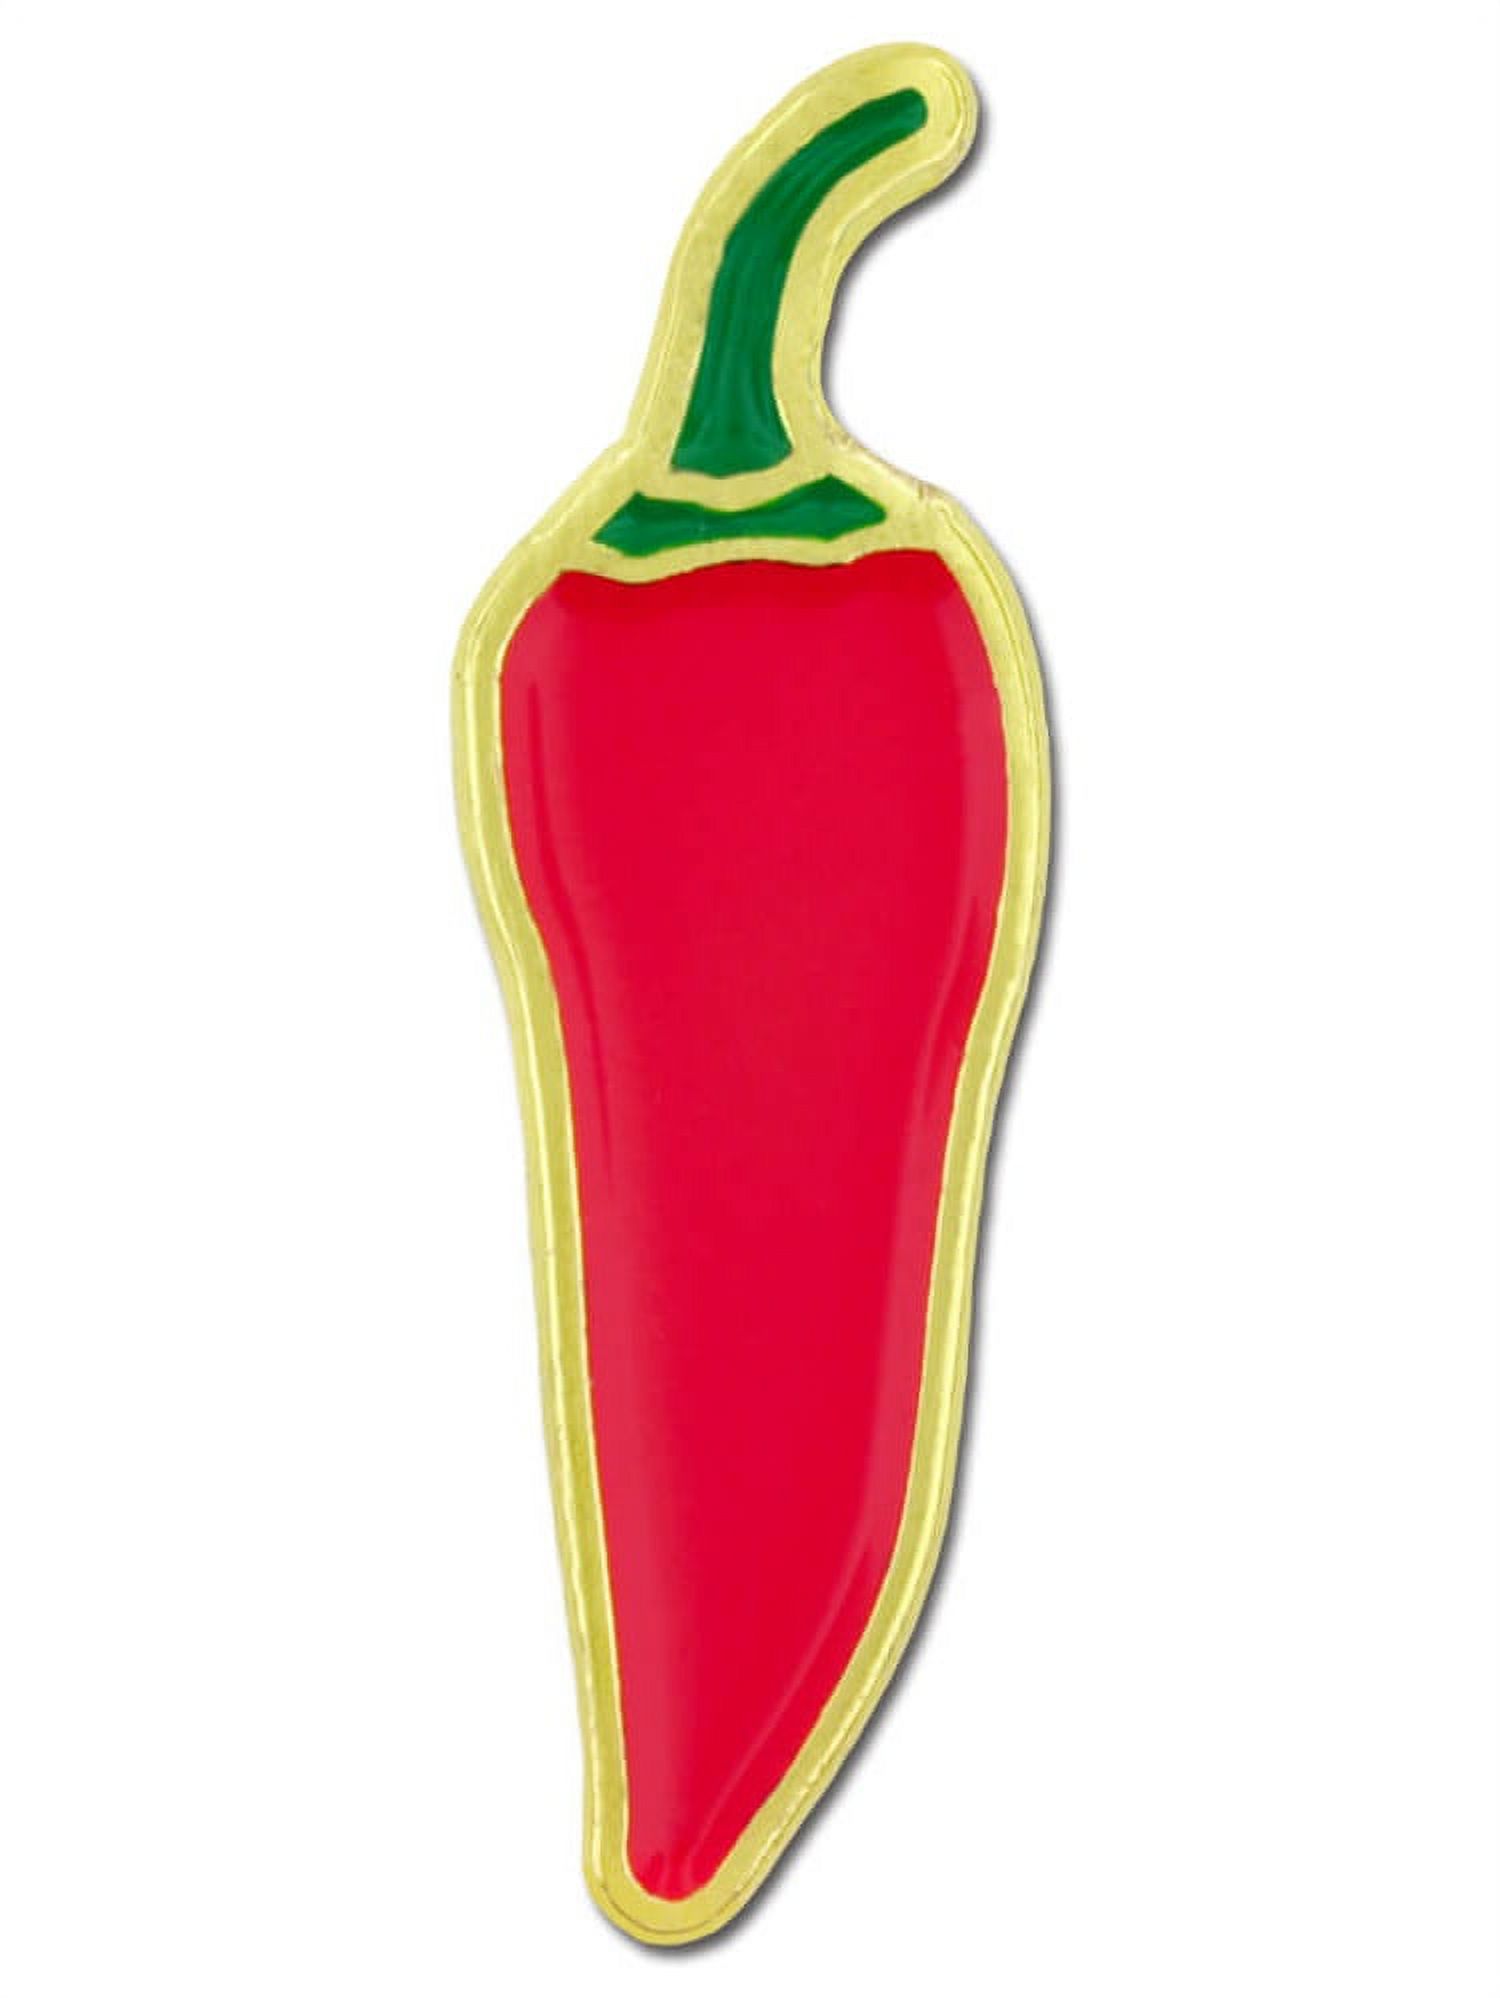 PinMart Spicy Red Chili Pepper Food Enamel Lapel Pin -  FunUnisex Lapel Pins for Teens and Adults - image 1 of 3